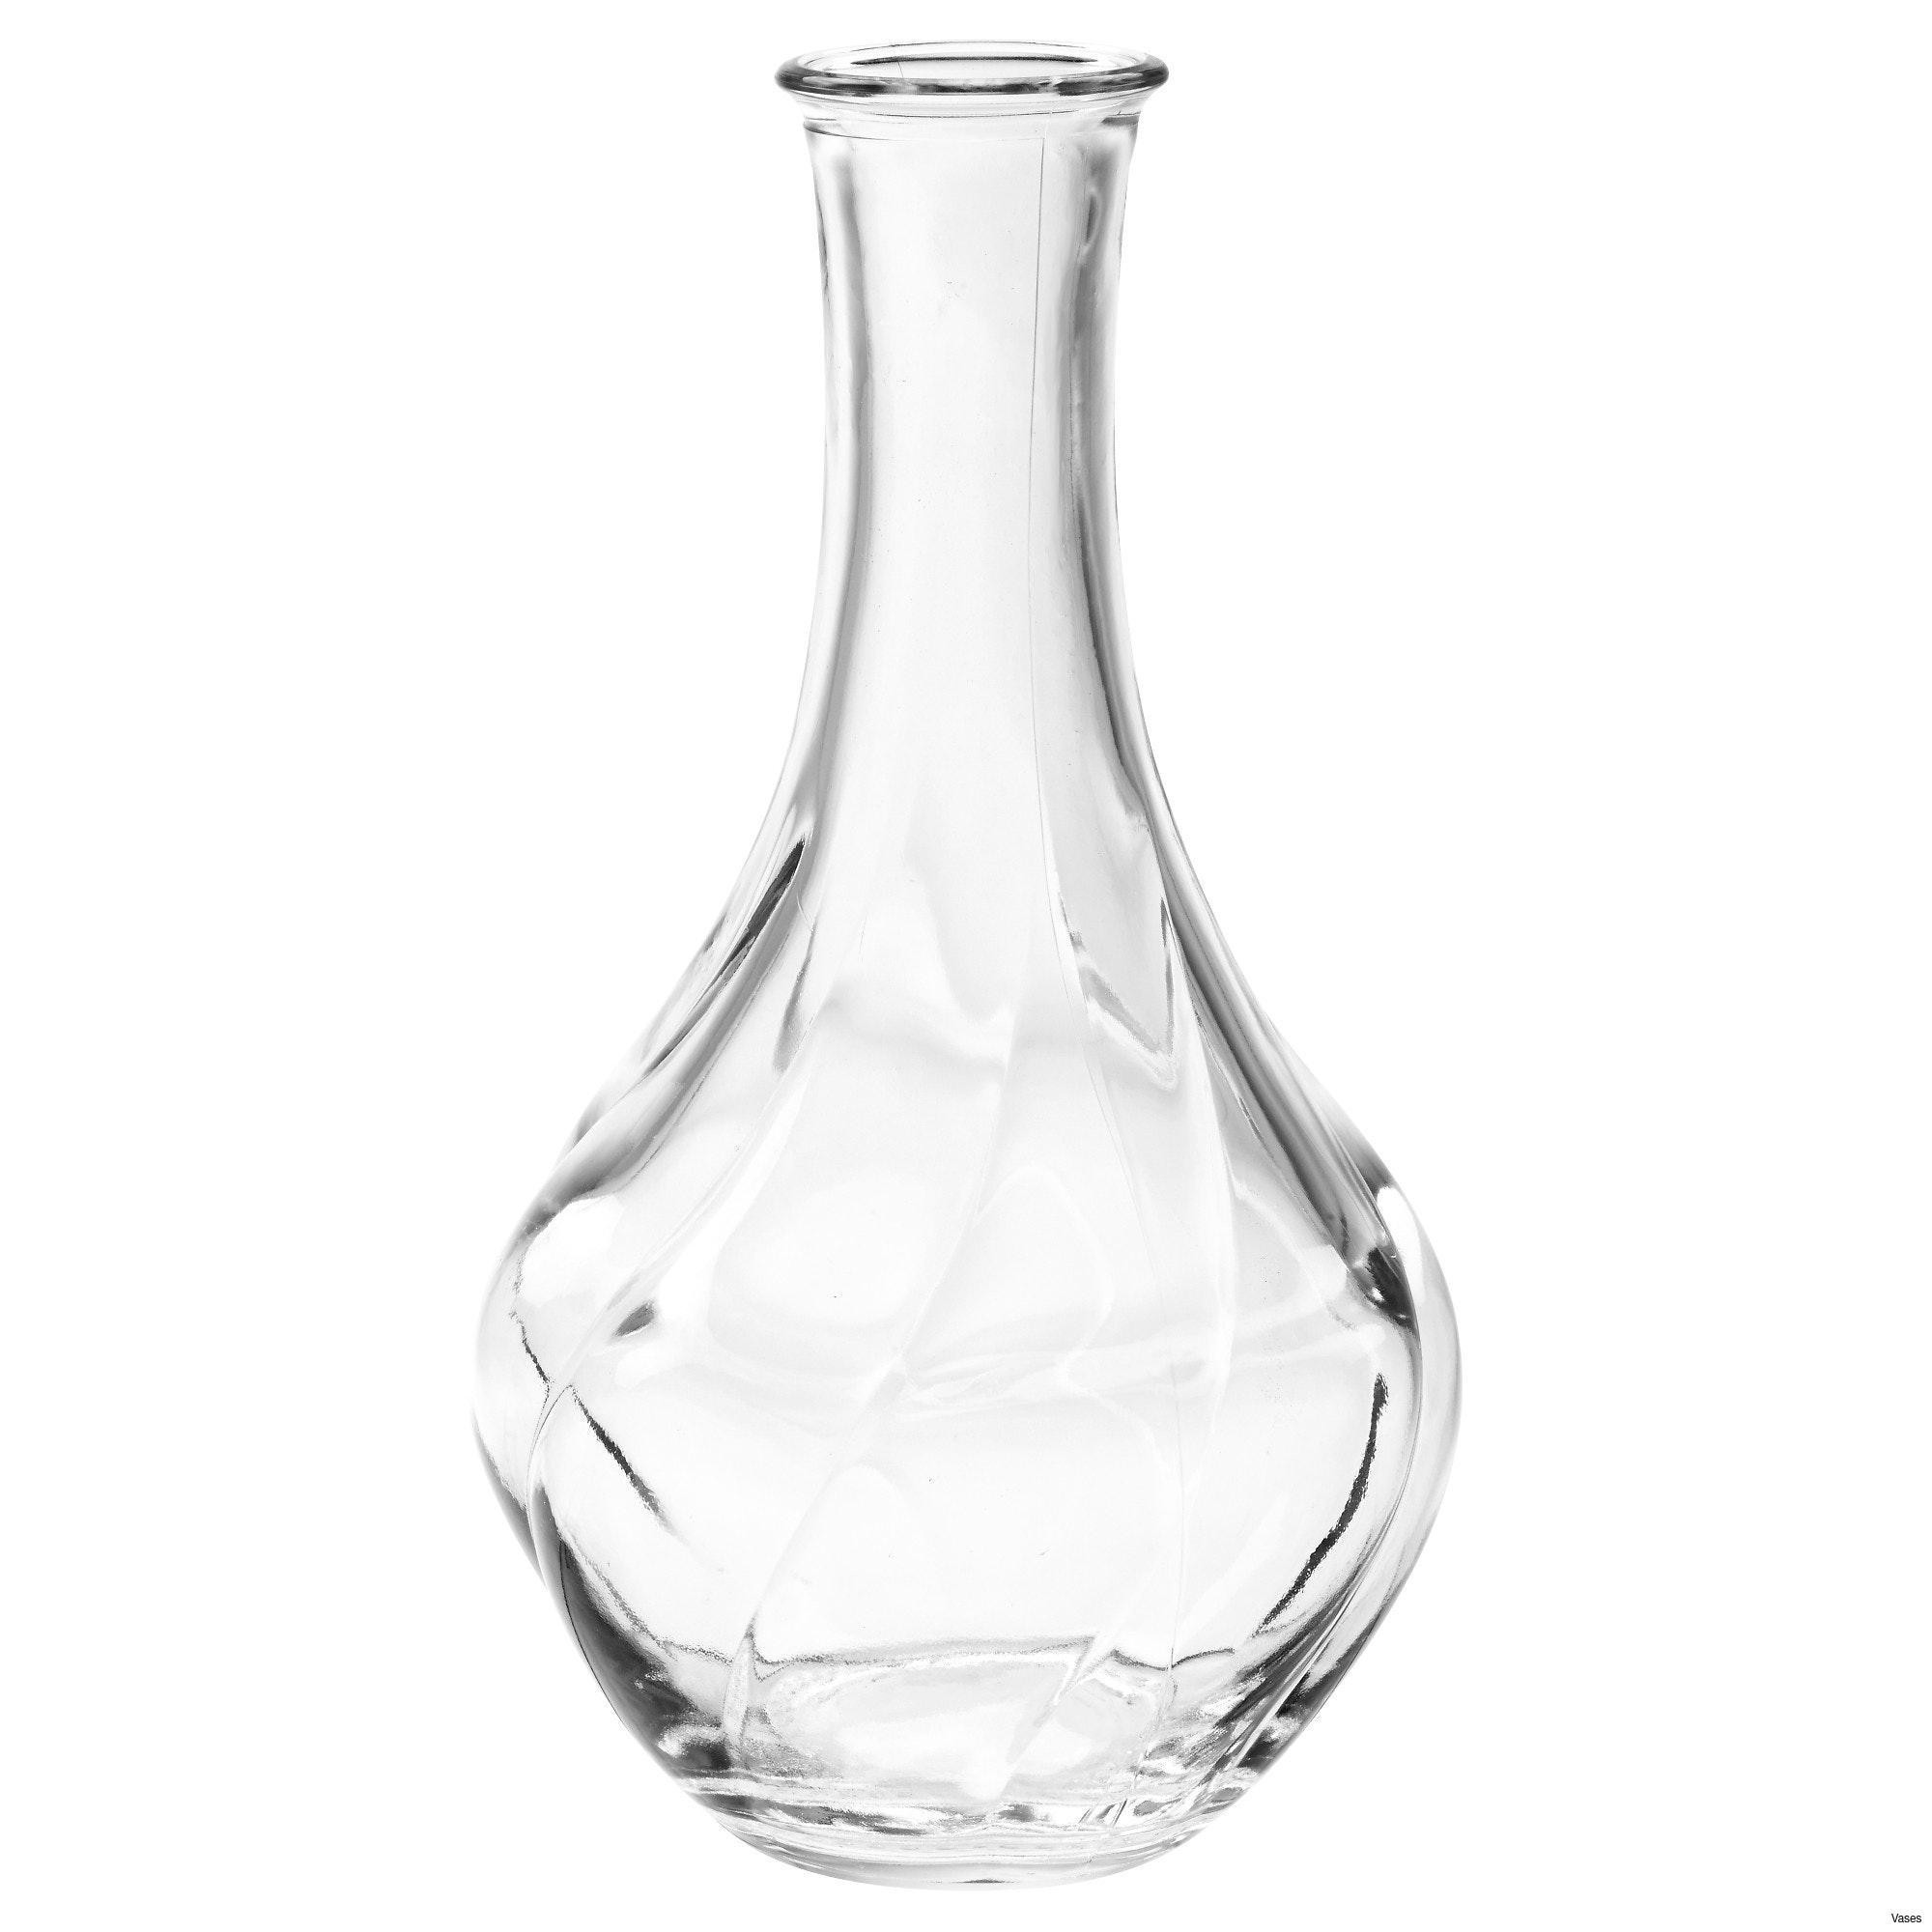 18 Perfect Glass Pillar Vase 2024 free download glass pillar vase of heavy glass vase gallery living room glass vases fresh clear vase 0d with regard to heavy glass vase gallery living room glass vases fresh clear vase 0d tags amazing and